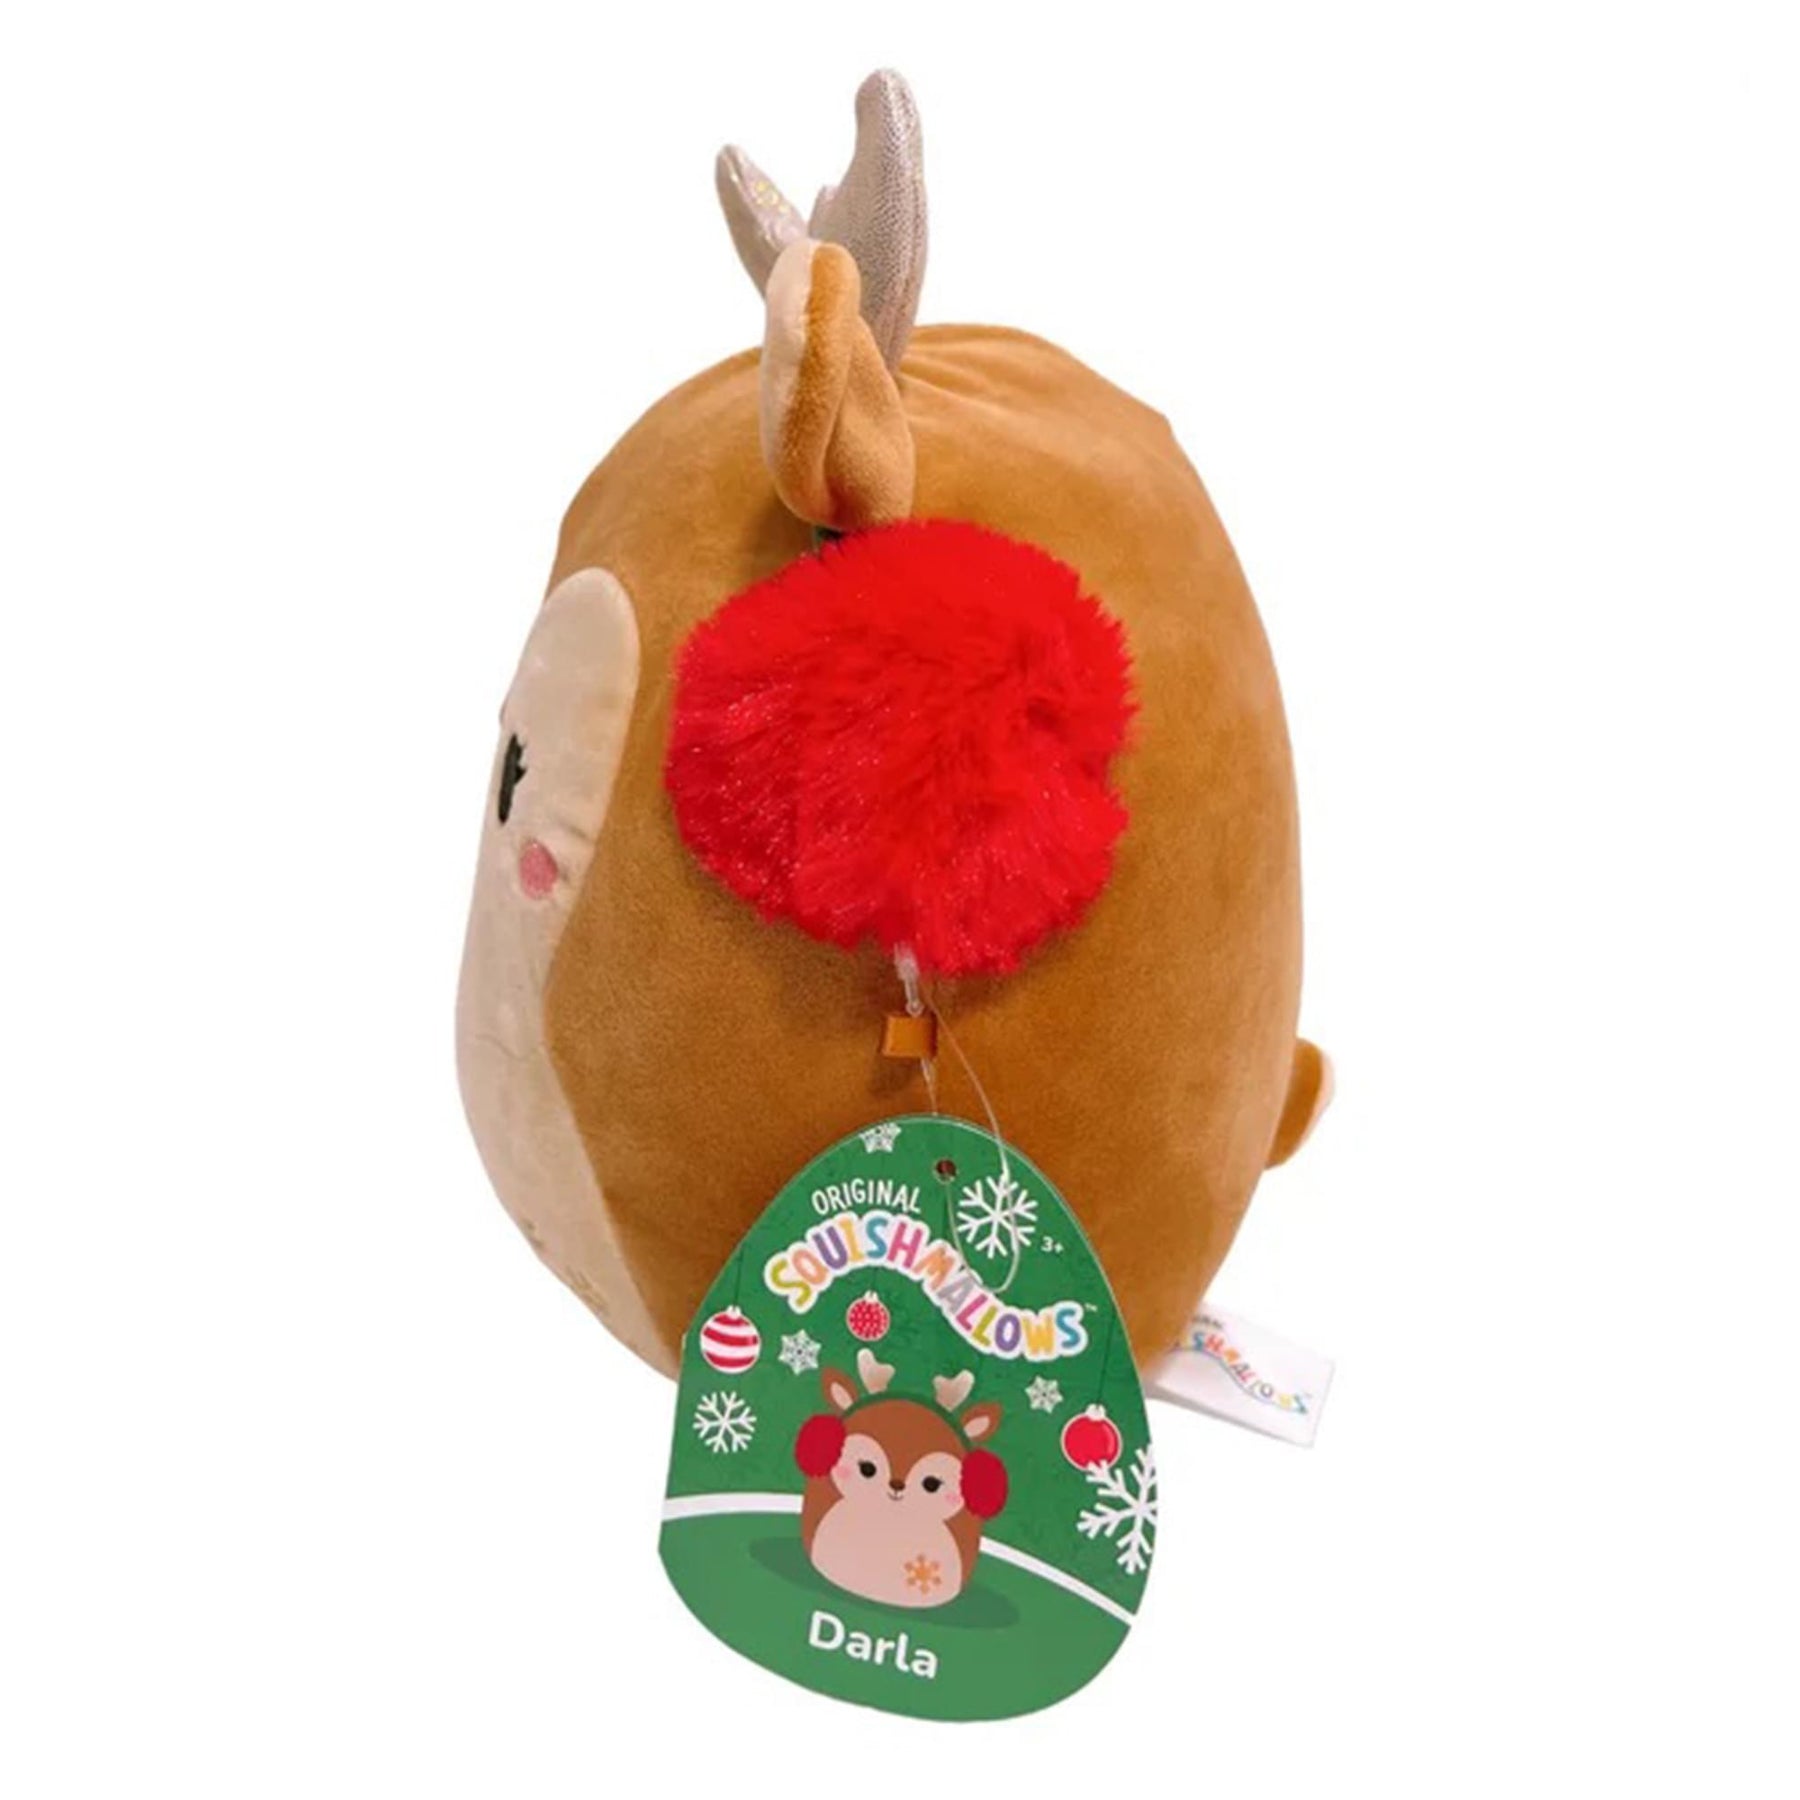 Squishmallow 8 Inch Holiday Plush | Darla the Deer